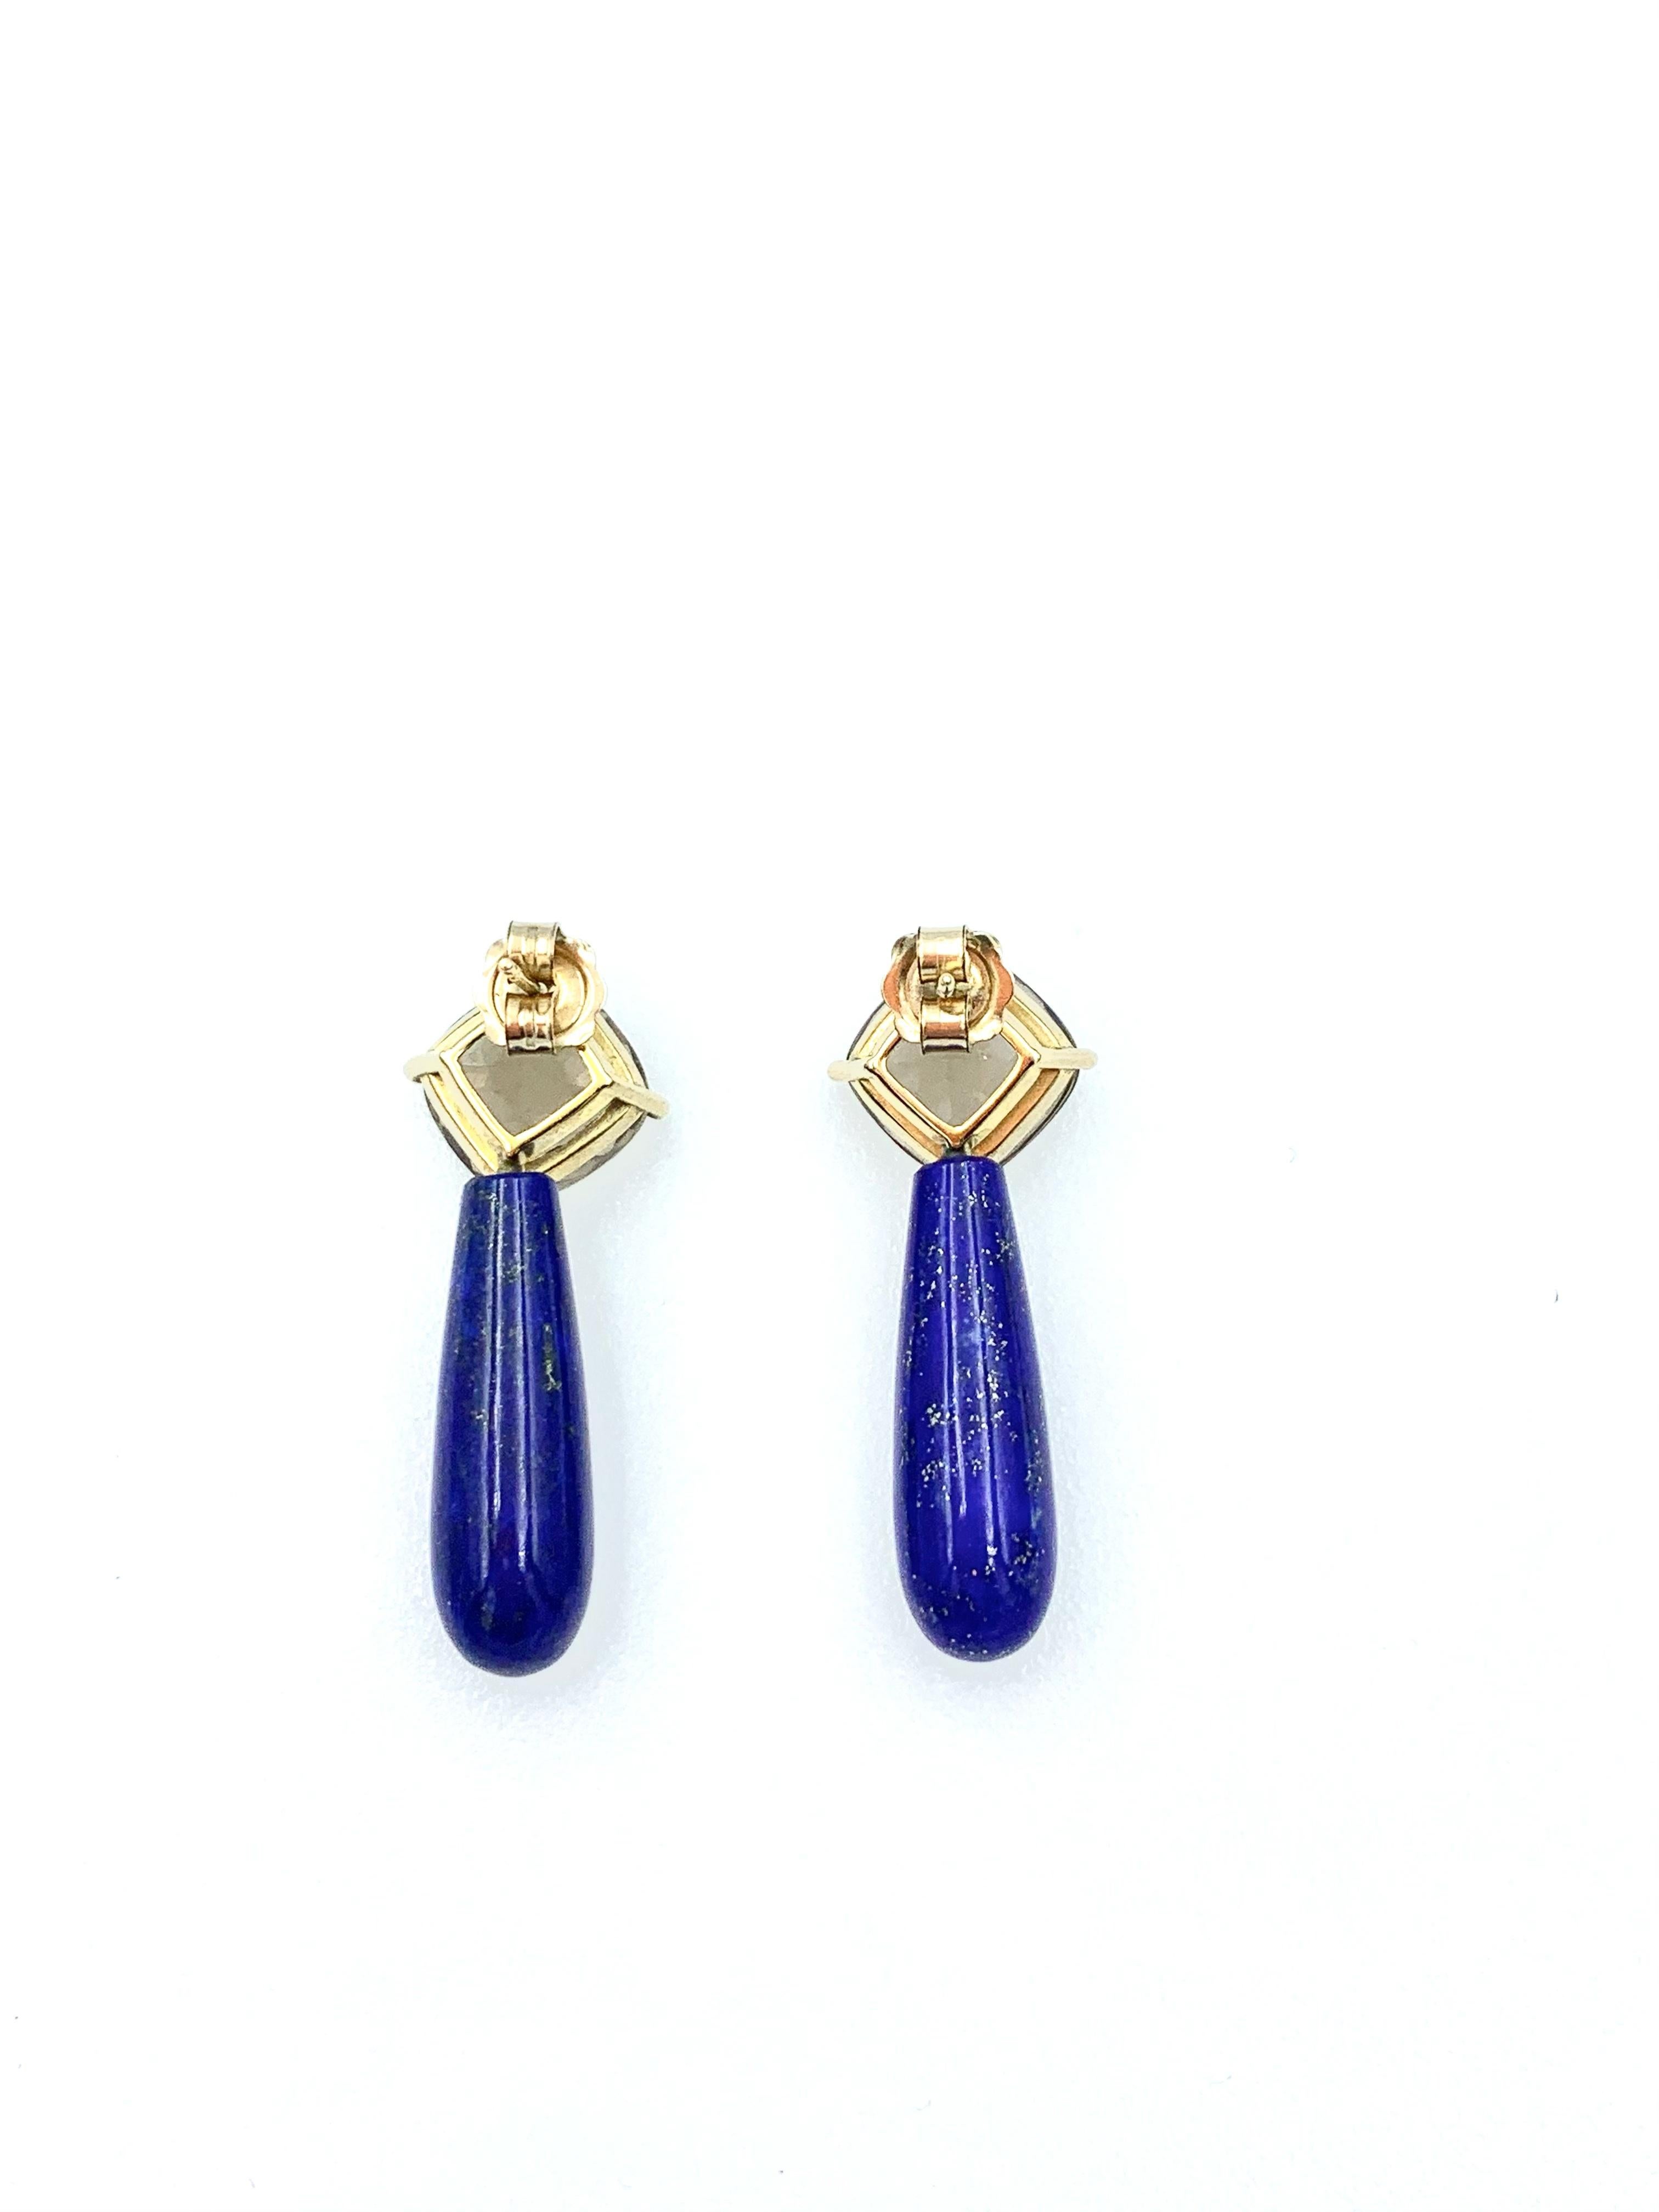 Contemporary Yellow Gold Rose Cut Smokey Quartz and Lapis Lazuli Smooth Briolette For Sale